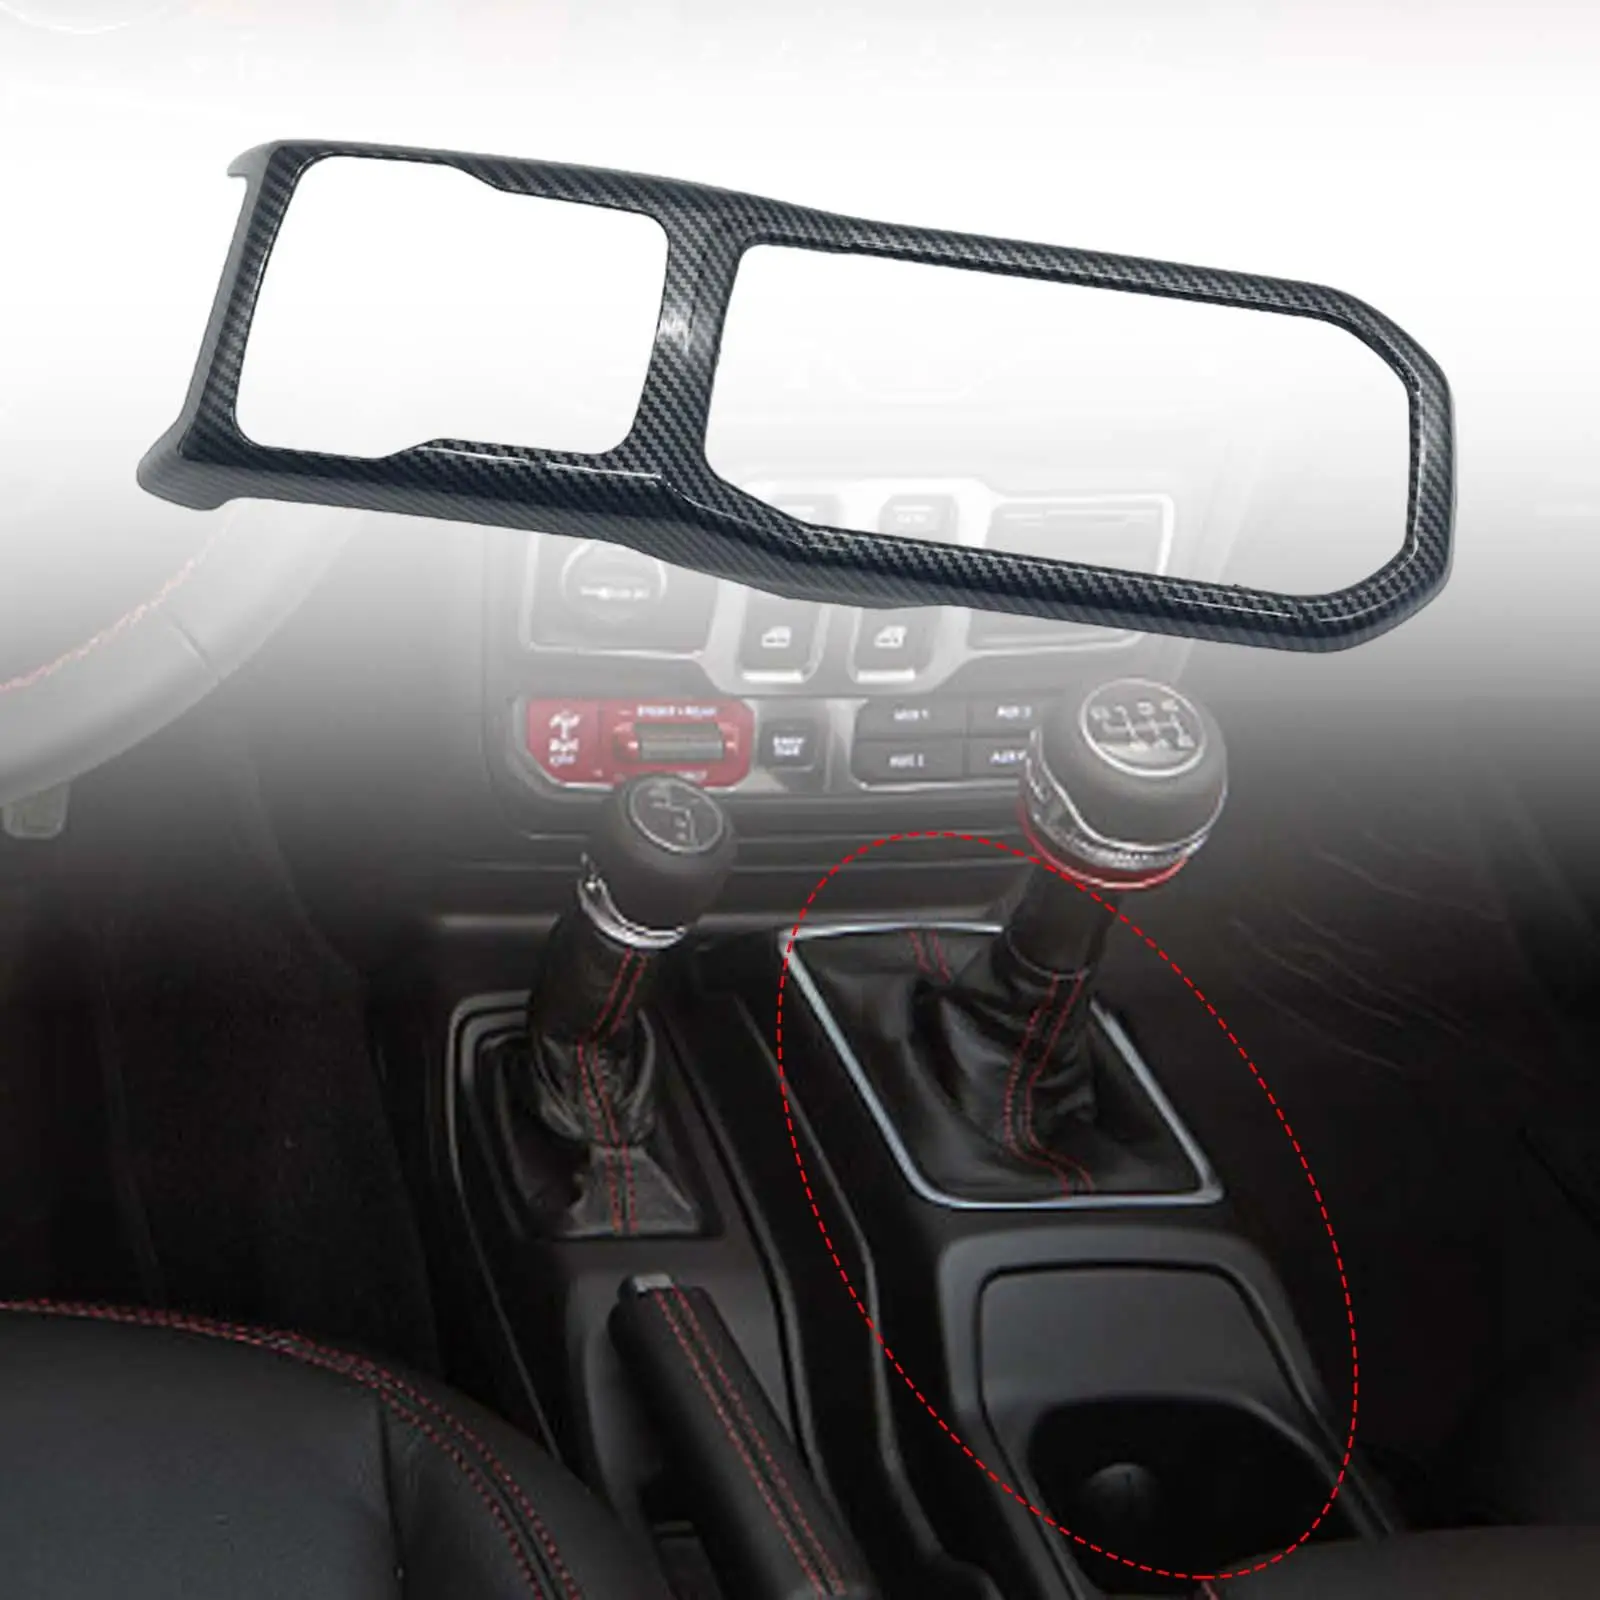 Gear Transfer Panel Cover Decoration Interior Accessories for Jeep 2018 to 2022 JL Stable Performance Easily to Install